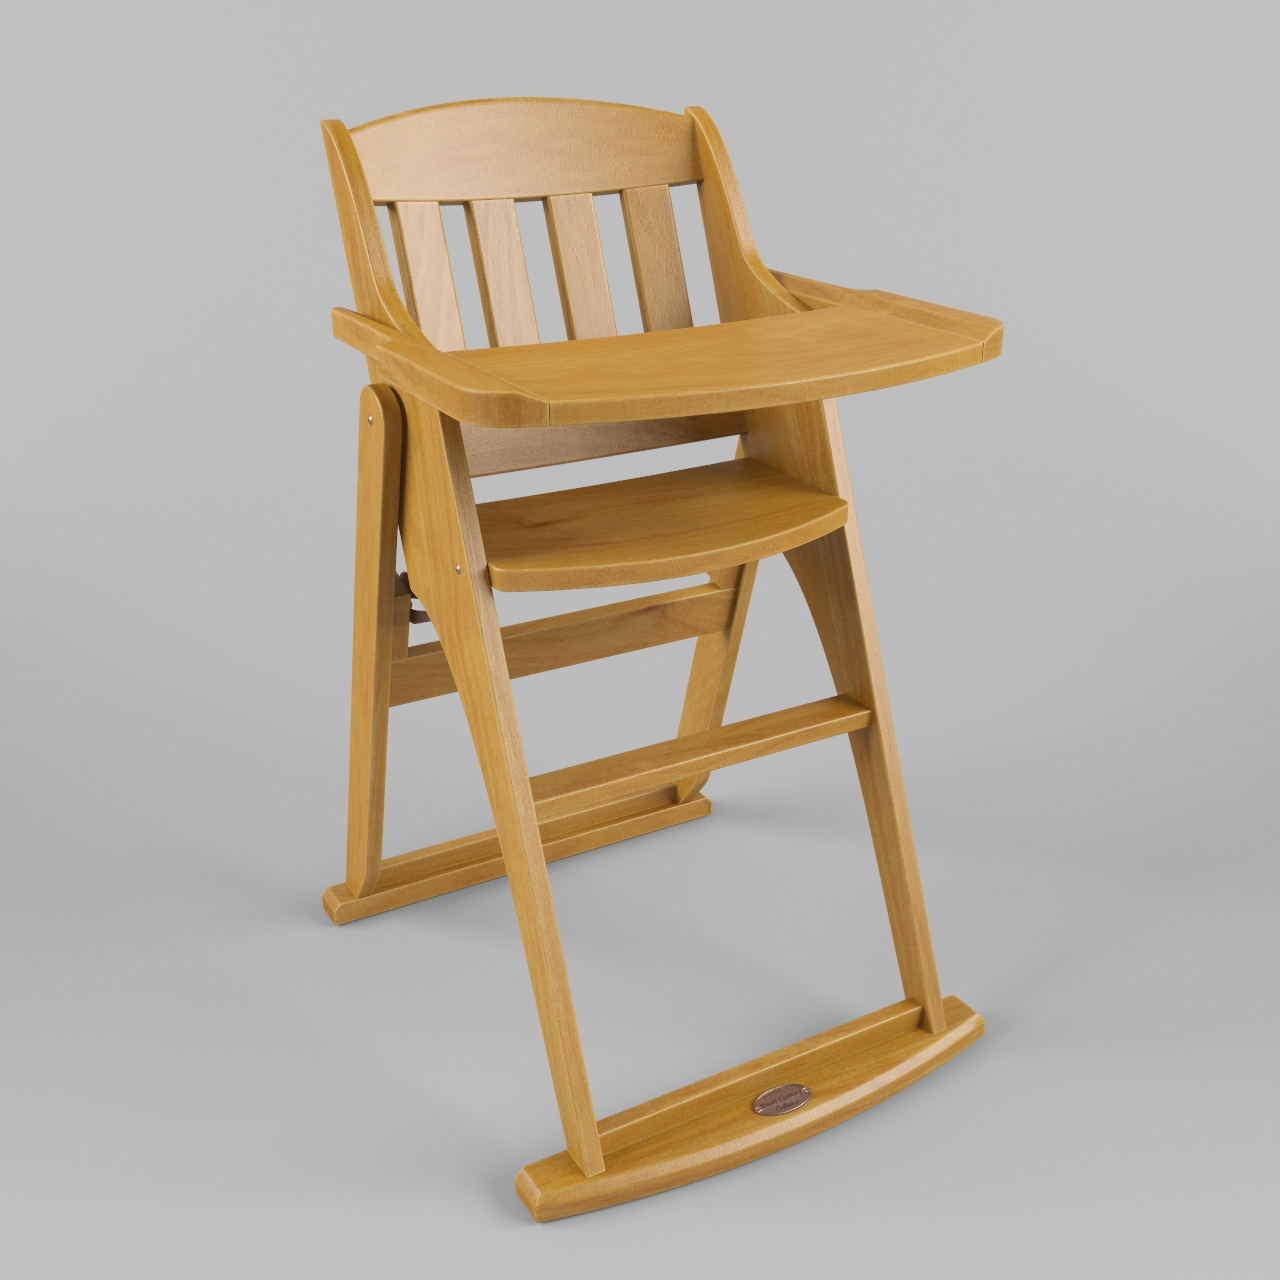 Chair for child 01 3